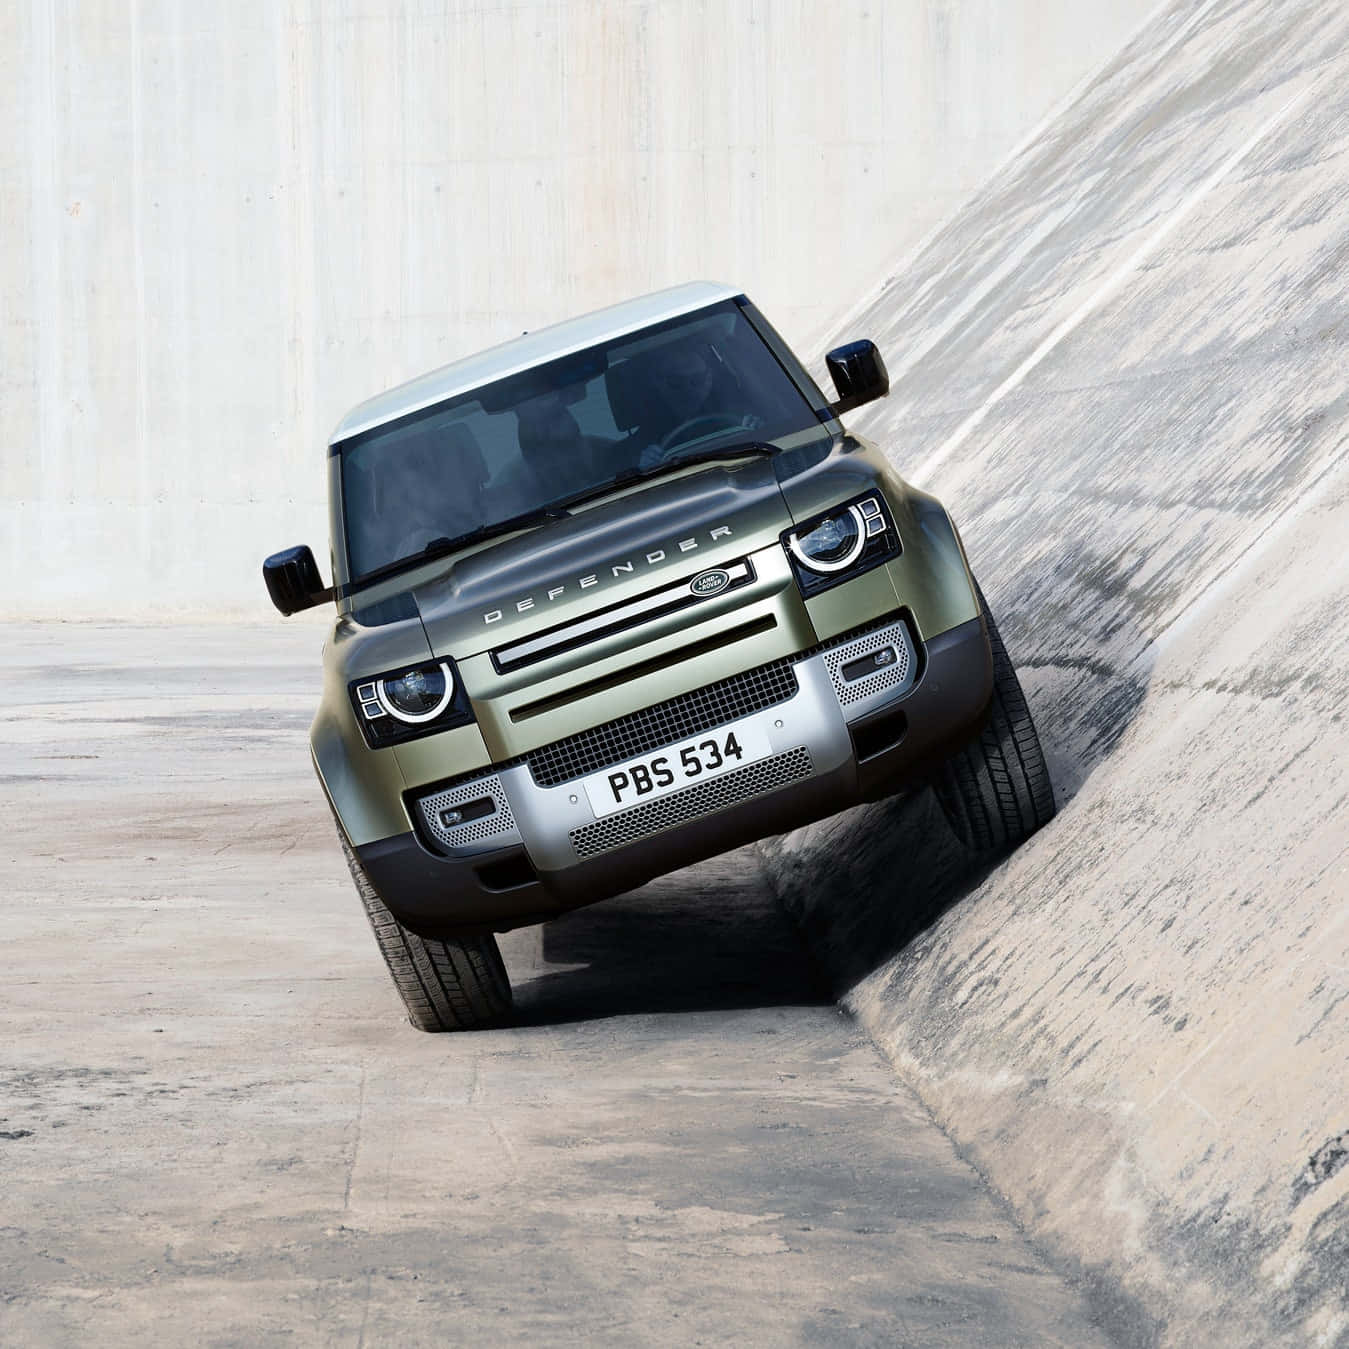 Rugged and Capable Land Rover Defender on the Move Wallpaper